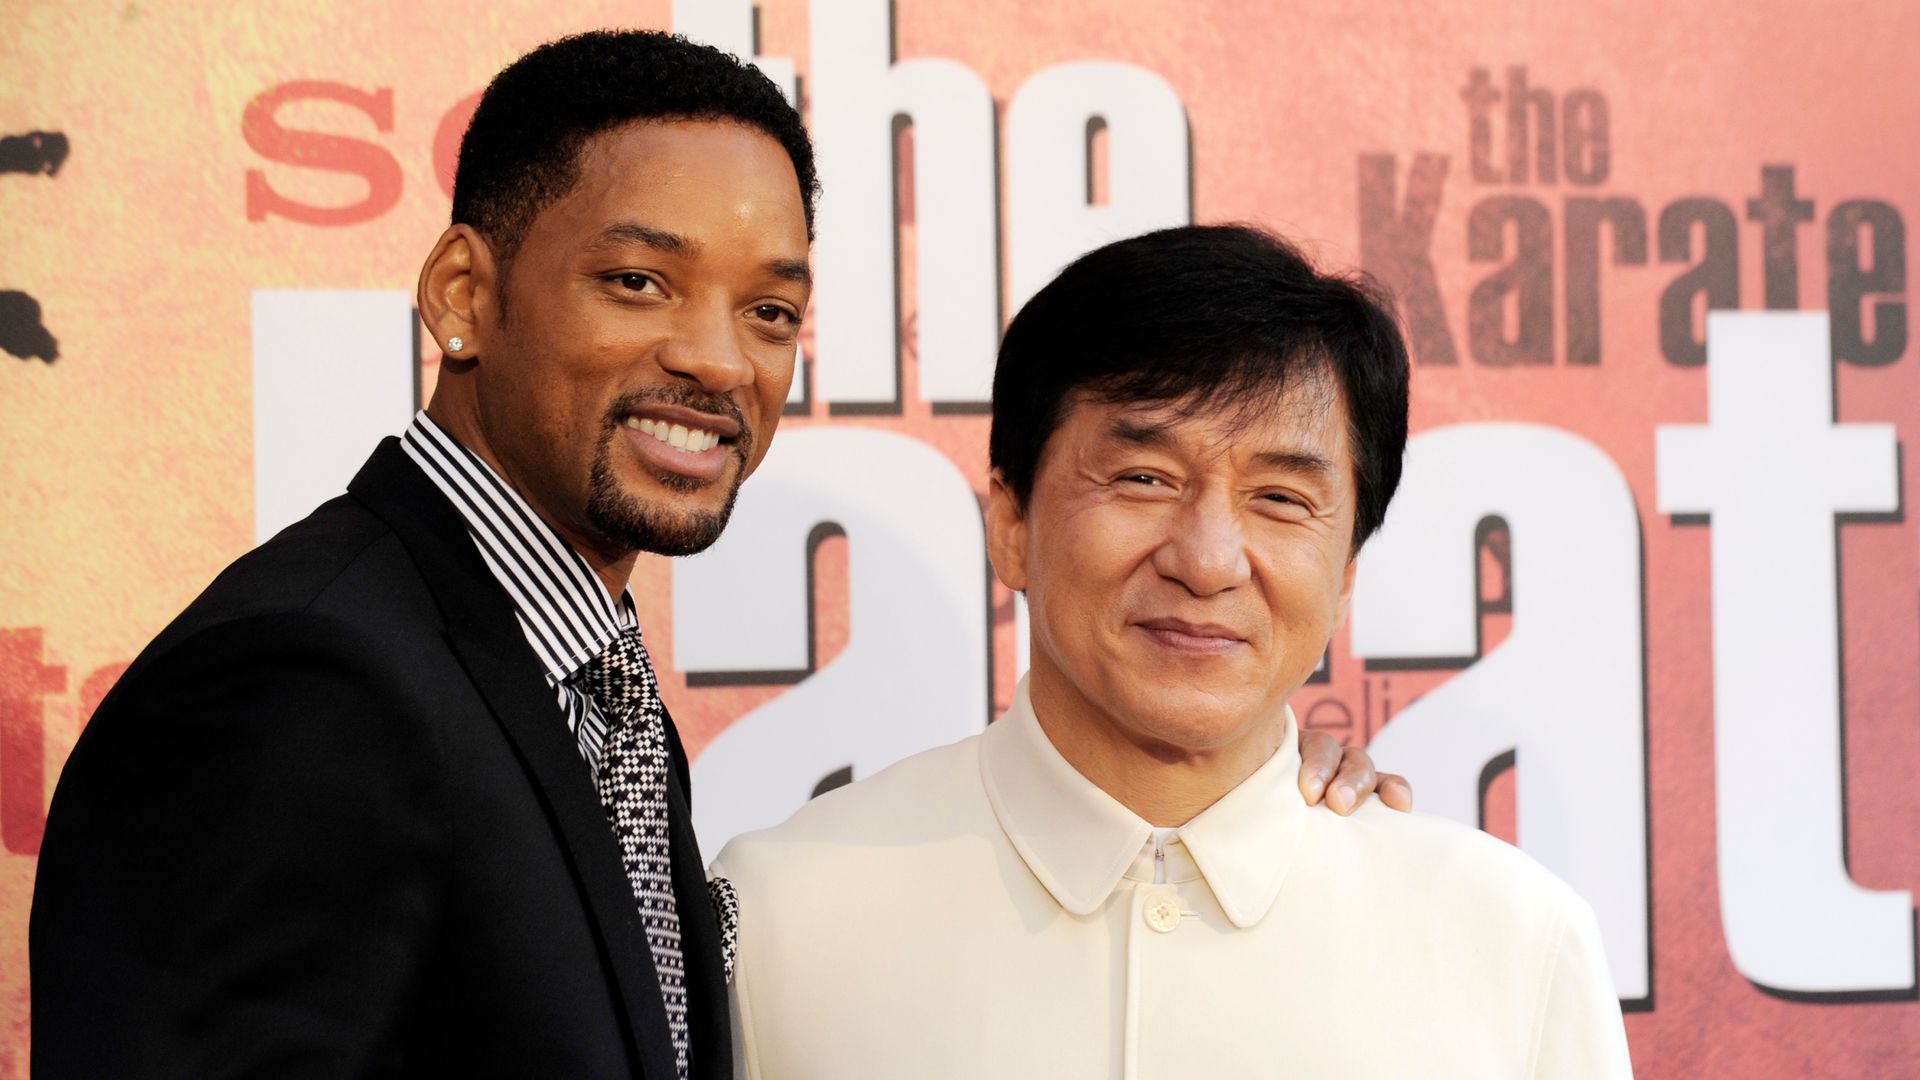 Will Smith and Jackie Chan pose for photographers upon their arrival prior to the premiere of the film "The Karate Kid" on July 25, 2010 at the Grand Rex cinema in Paris